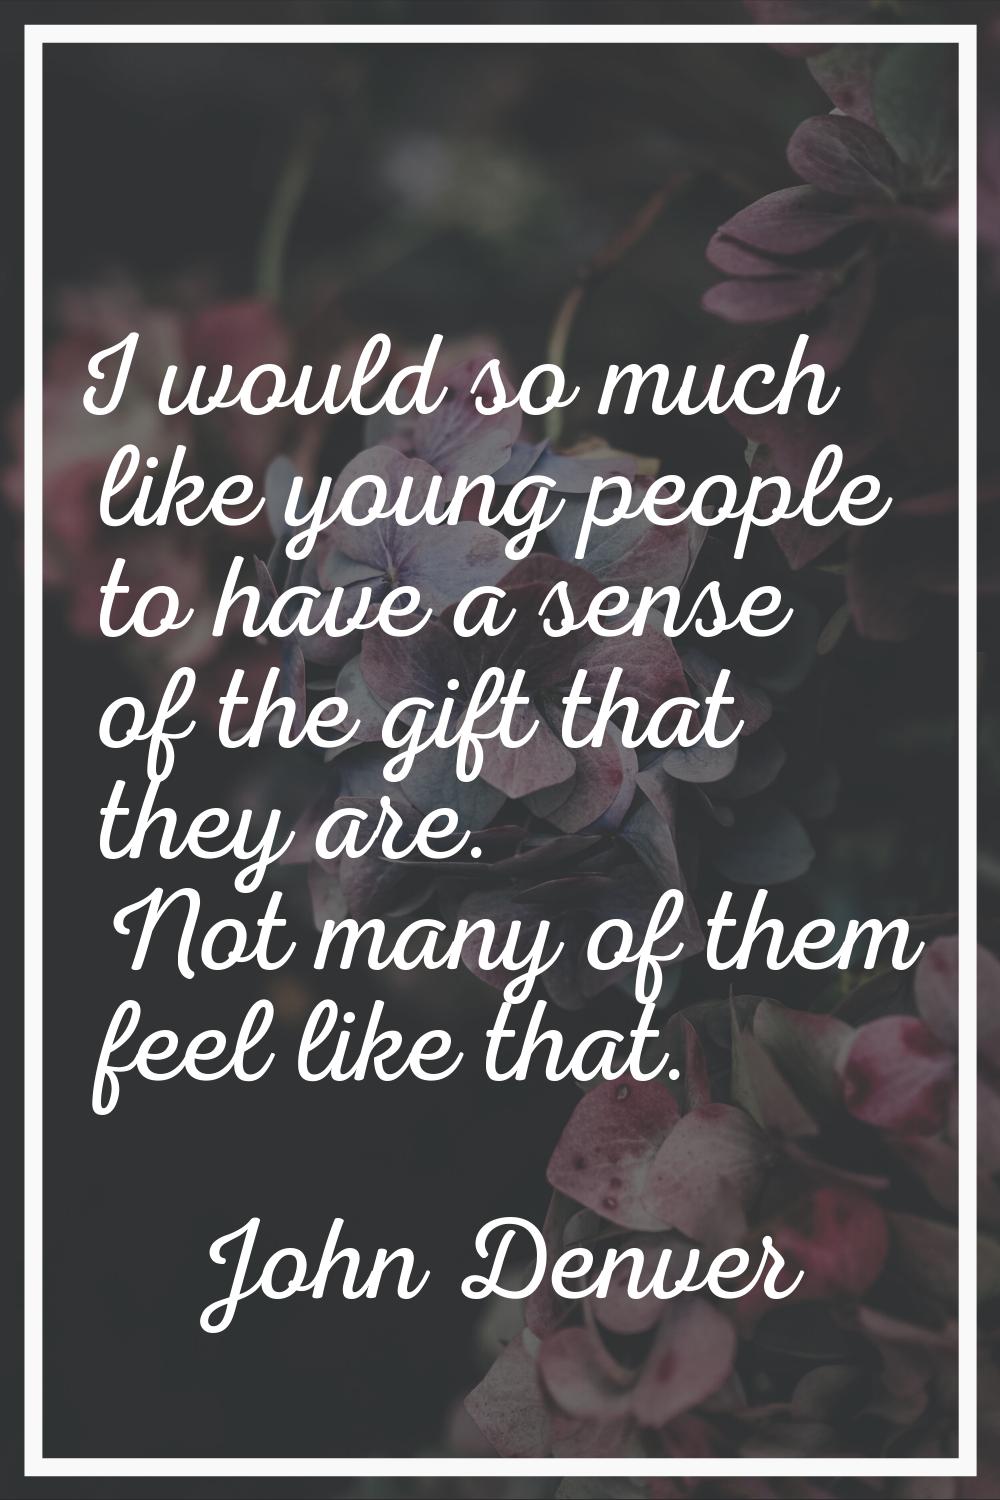 I would so much like young people to have a sense of the gift that they are. Not many of them feel 